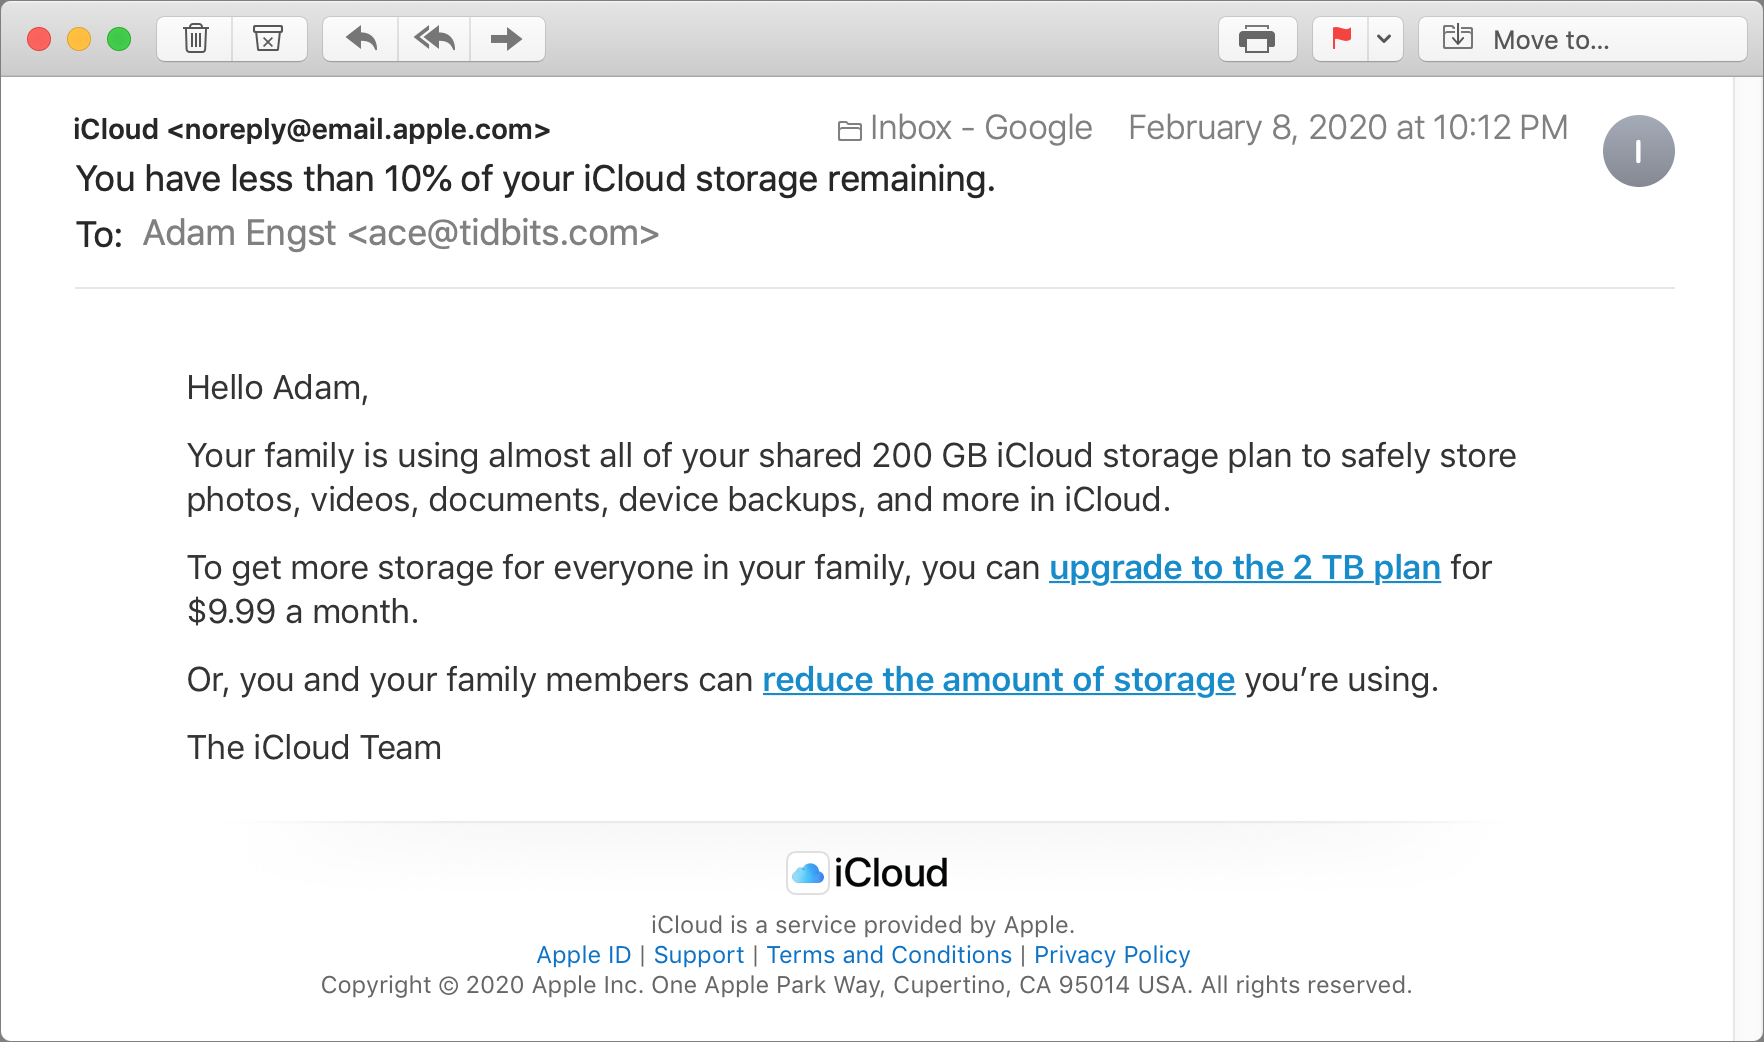 Google Photos vs. iCloud: Which is Better for You?